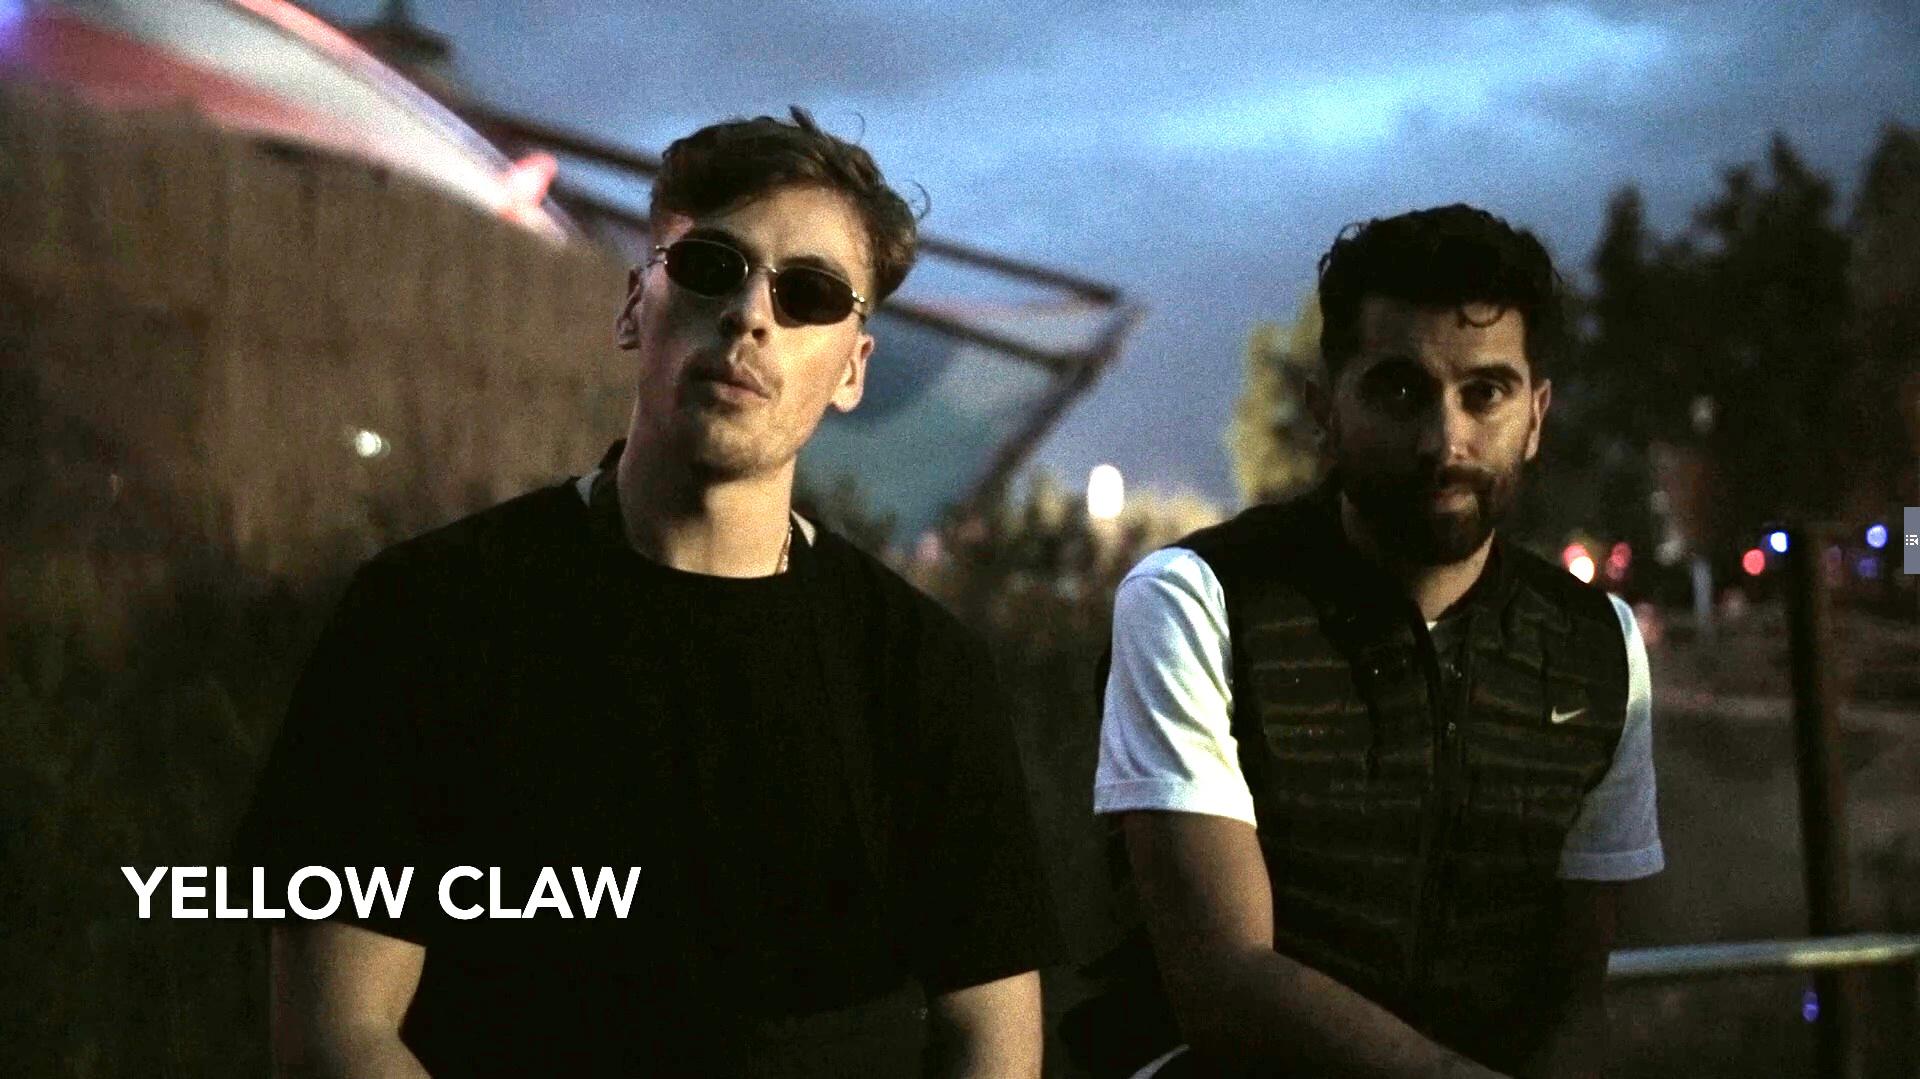 Yellow Claw - YELLOW CLAW SHOUT OUT